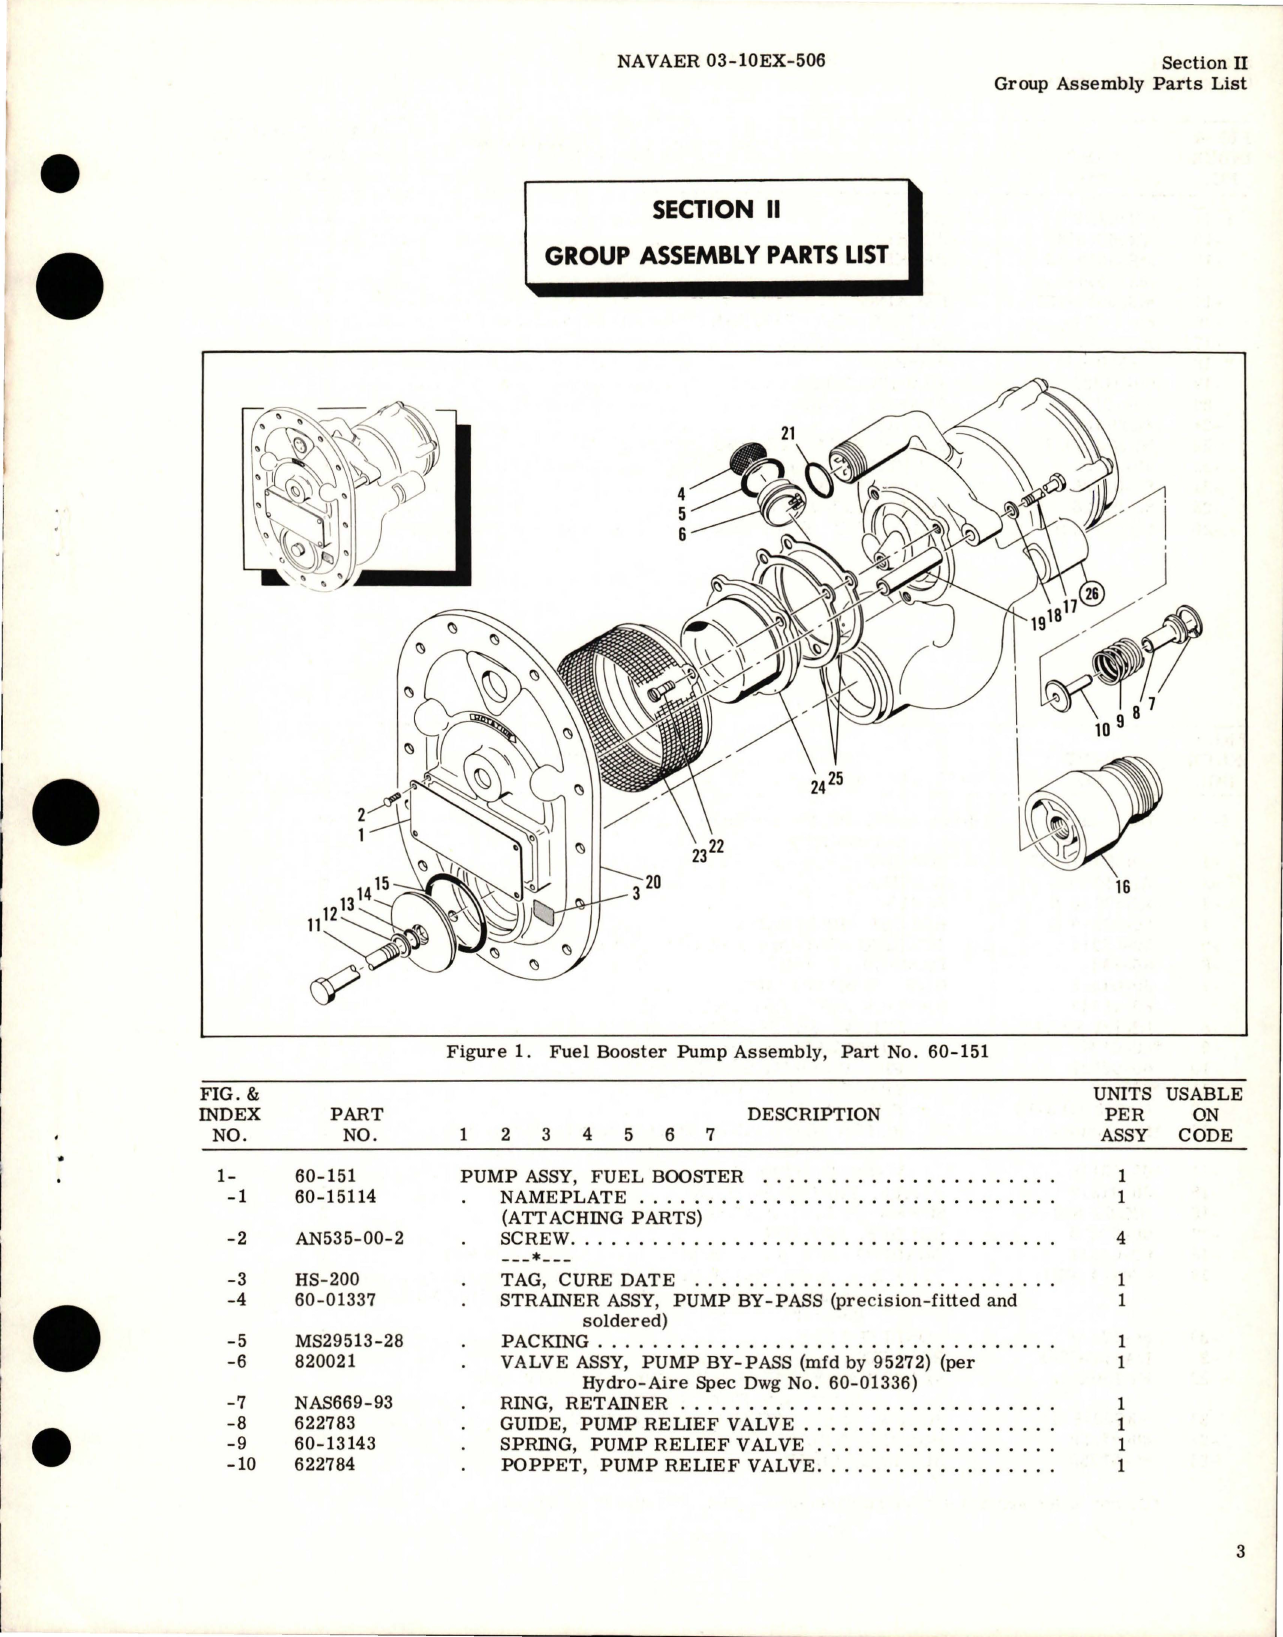 Sample page 5 from AirCorps Library document: Illustrated Parts Breakdown for Fuel Booster Pump - Part 60-151